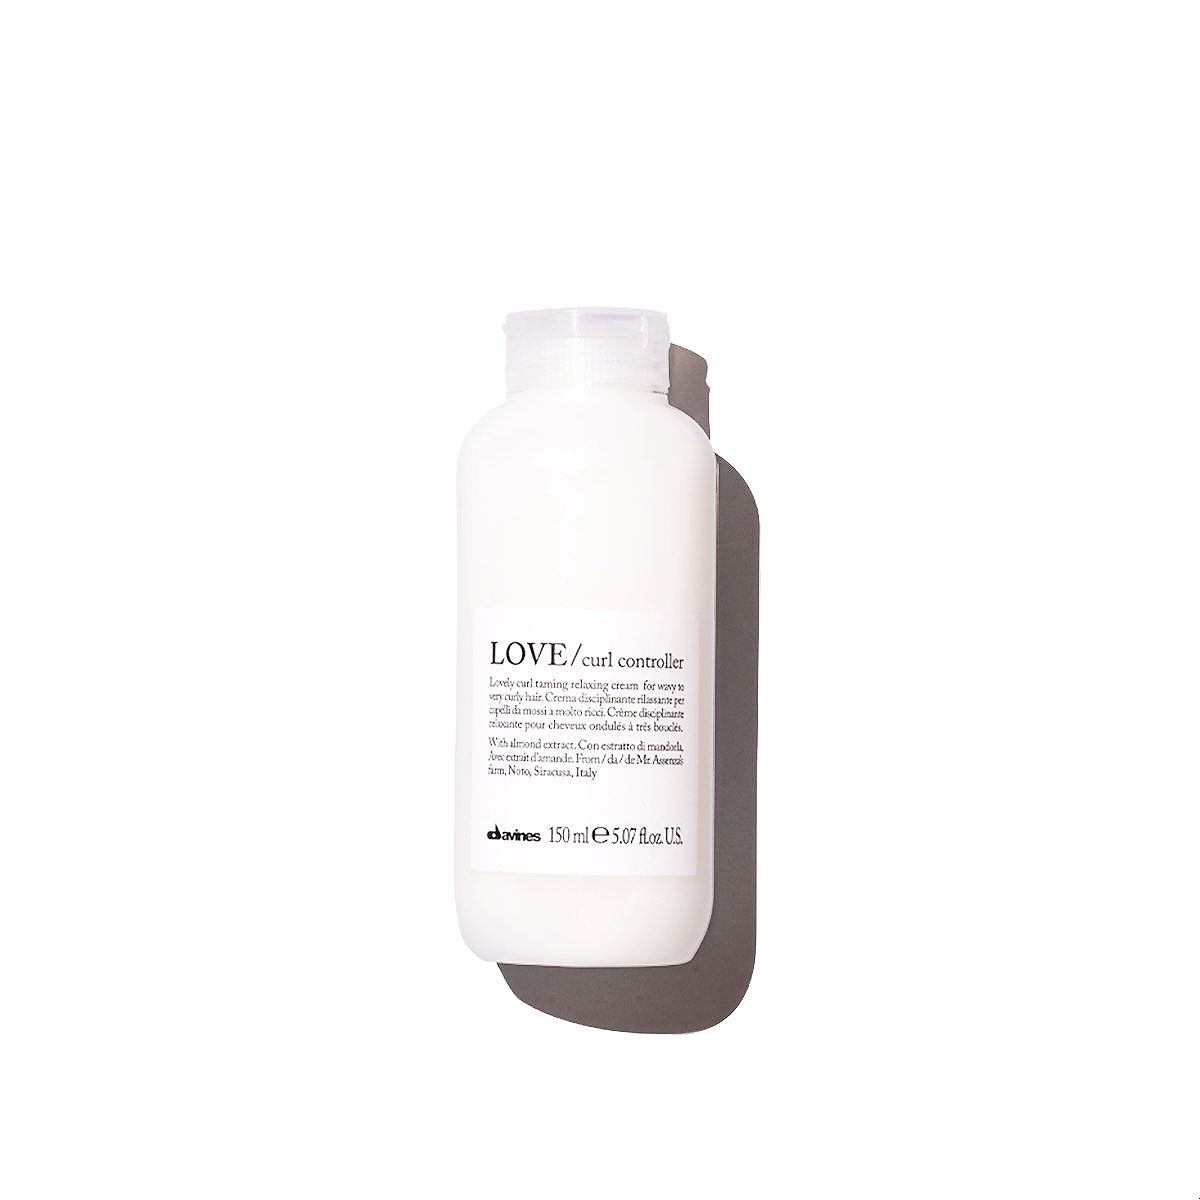 ESSENTIAL Love Curl Controller by davines